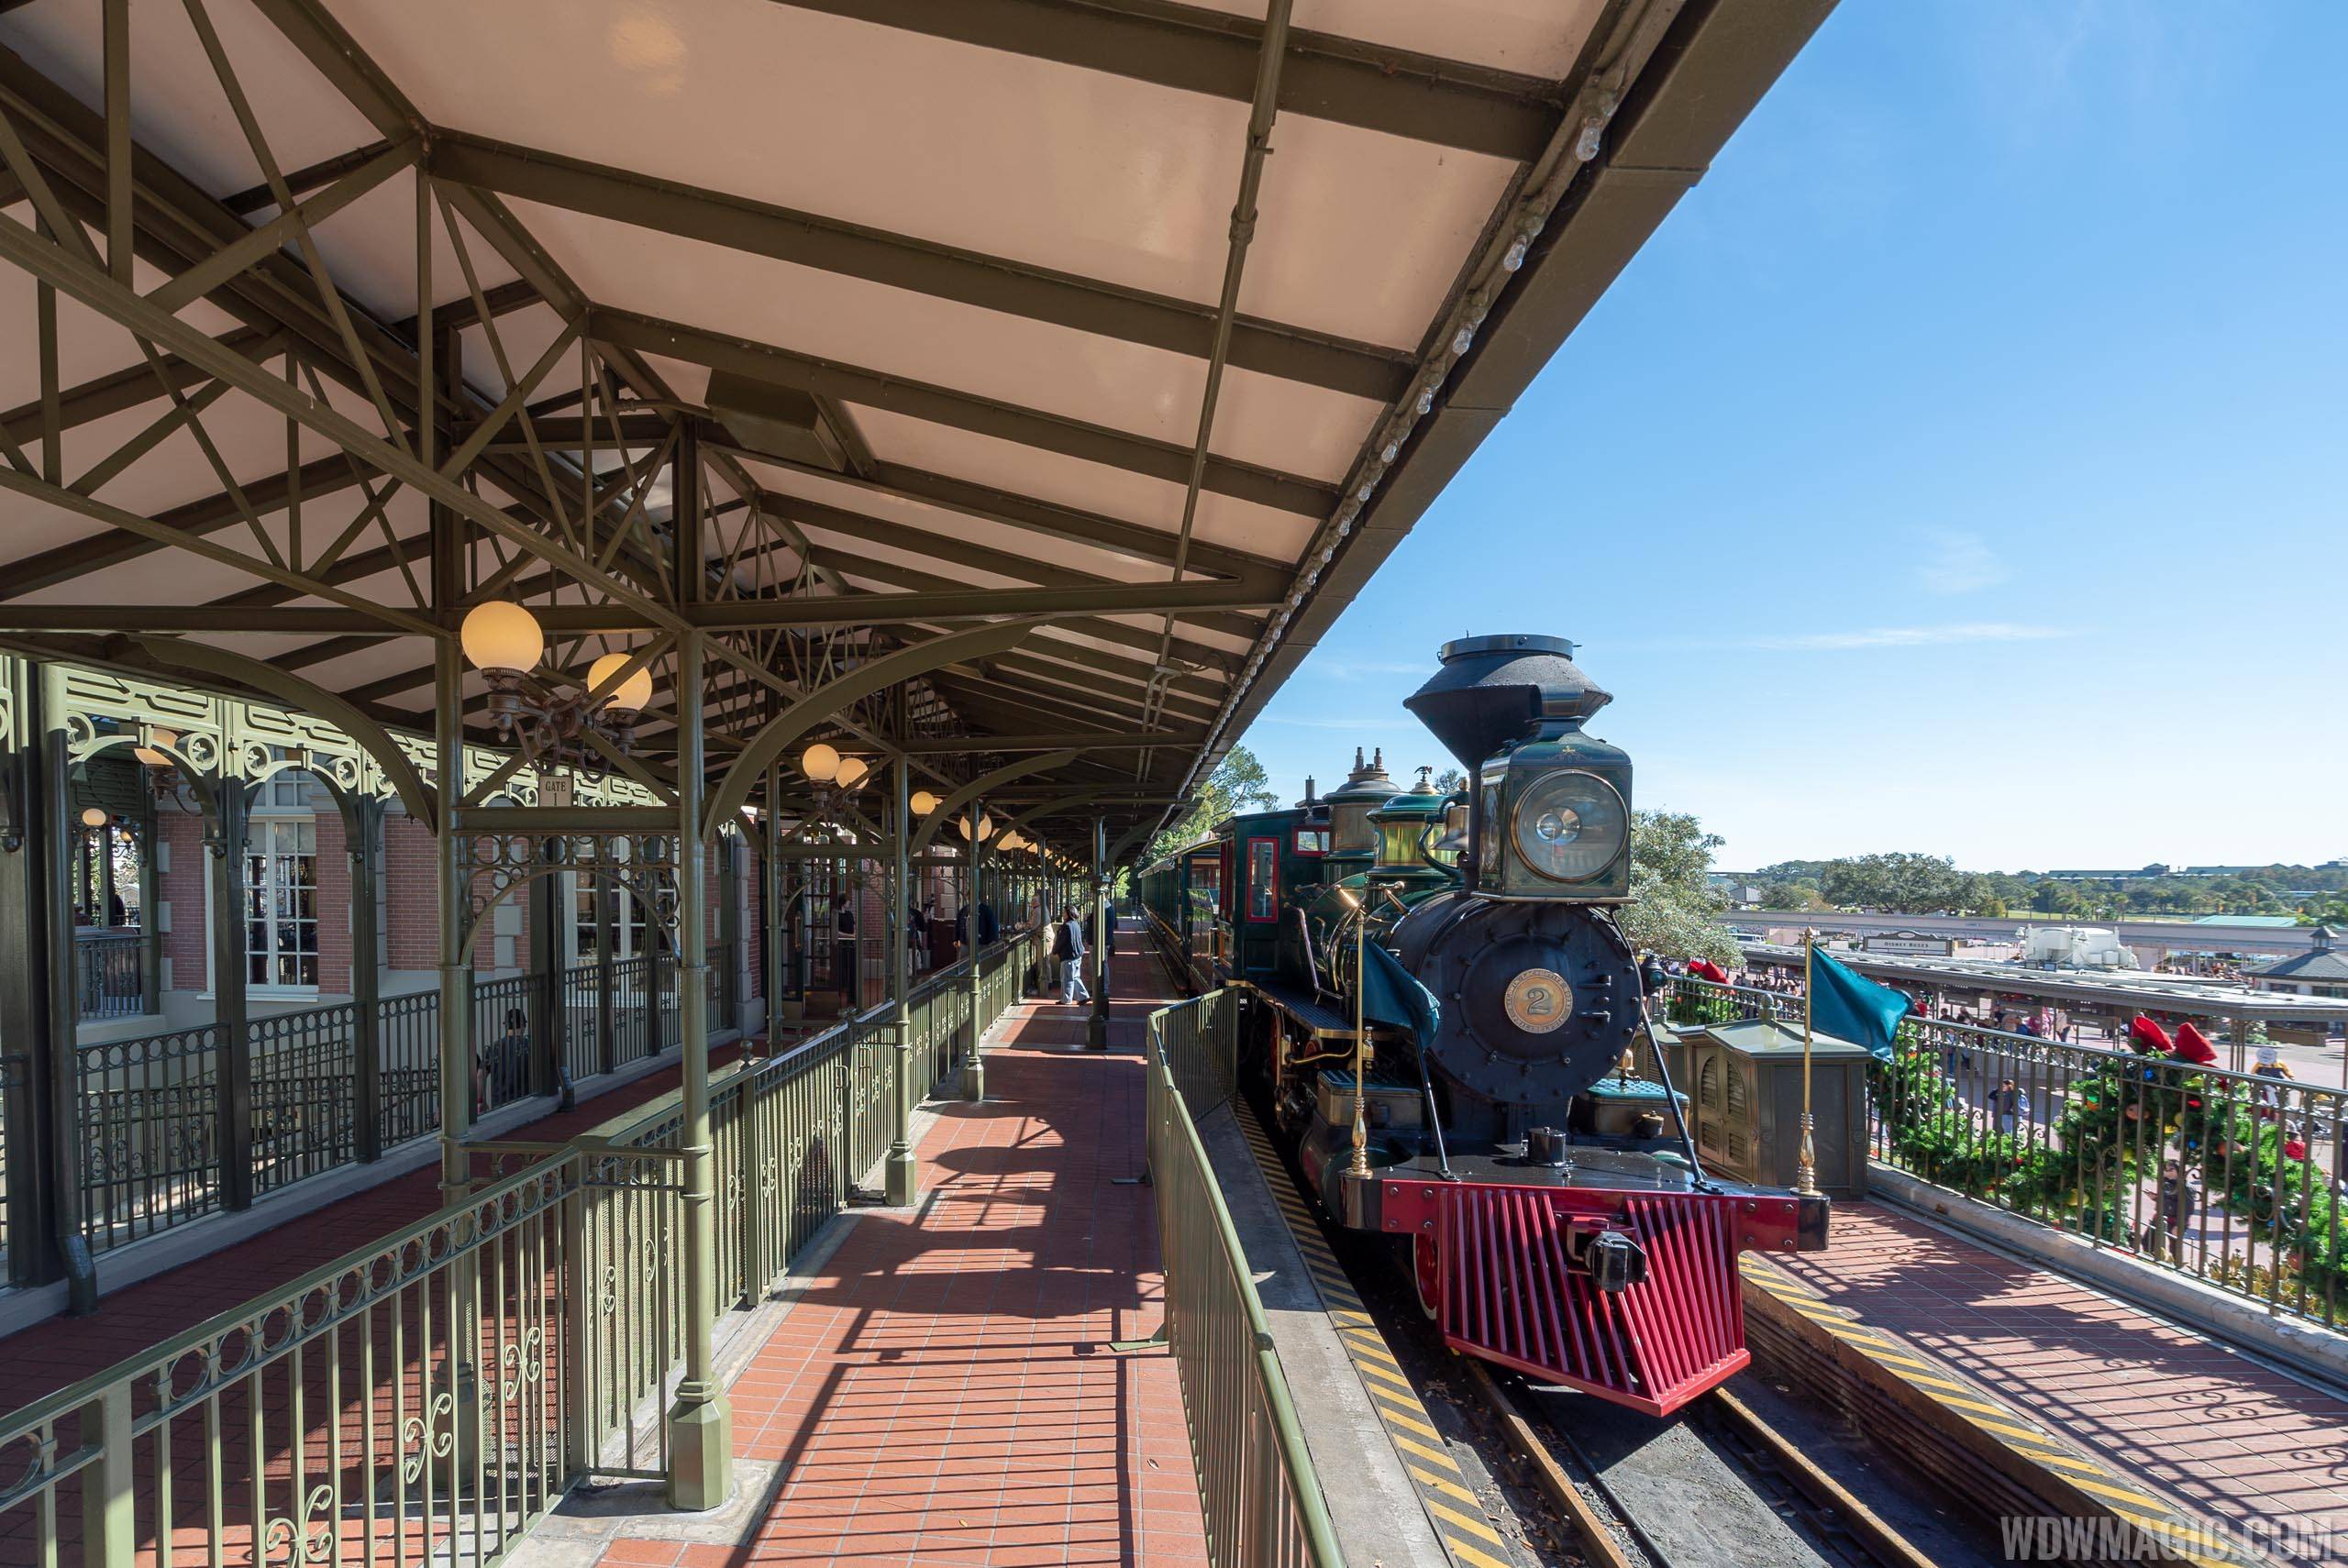 🚂 The Walt Disney World Railroad, in my view, is two attractions